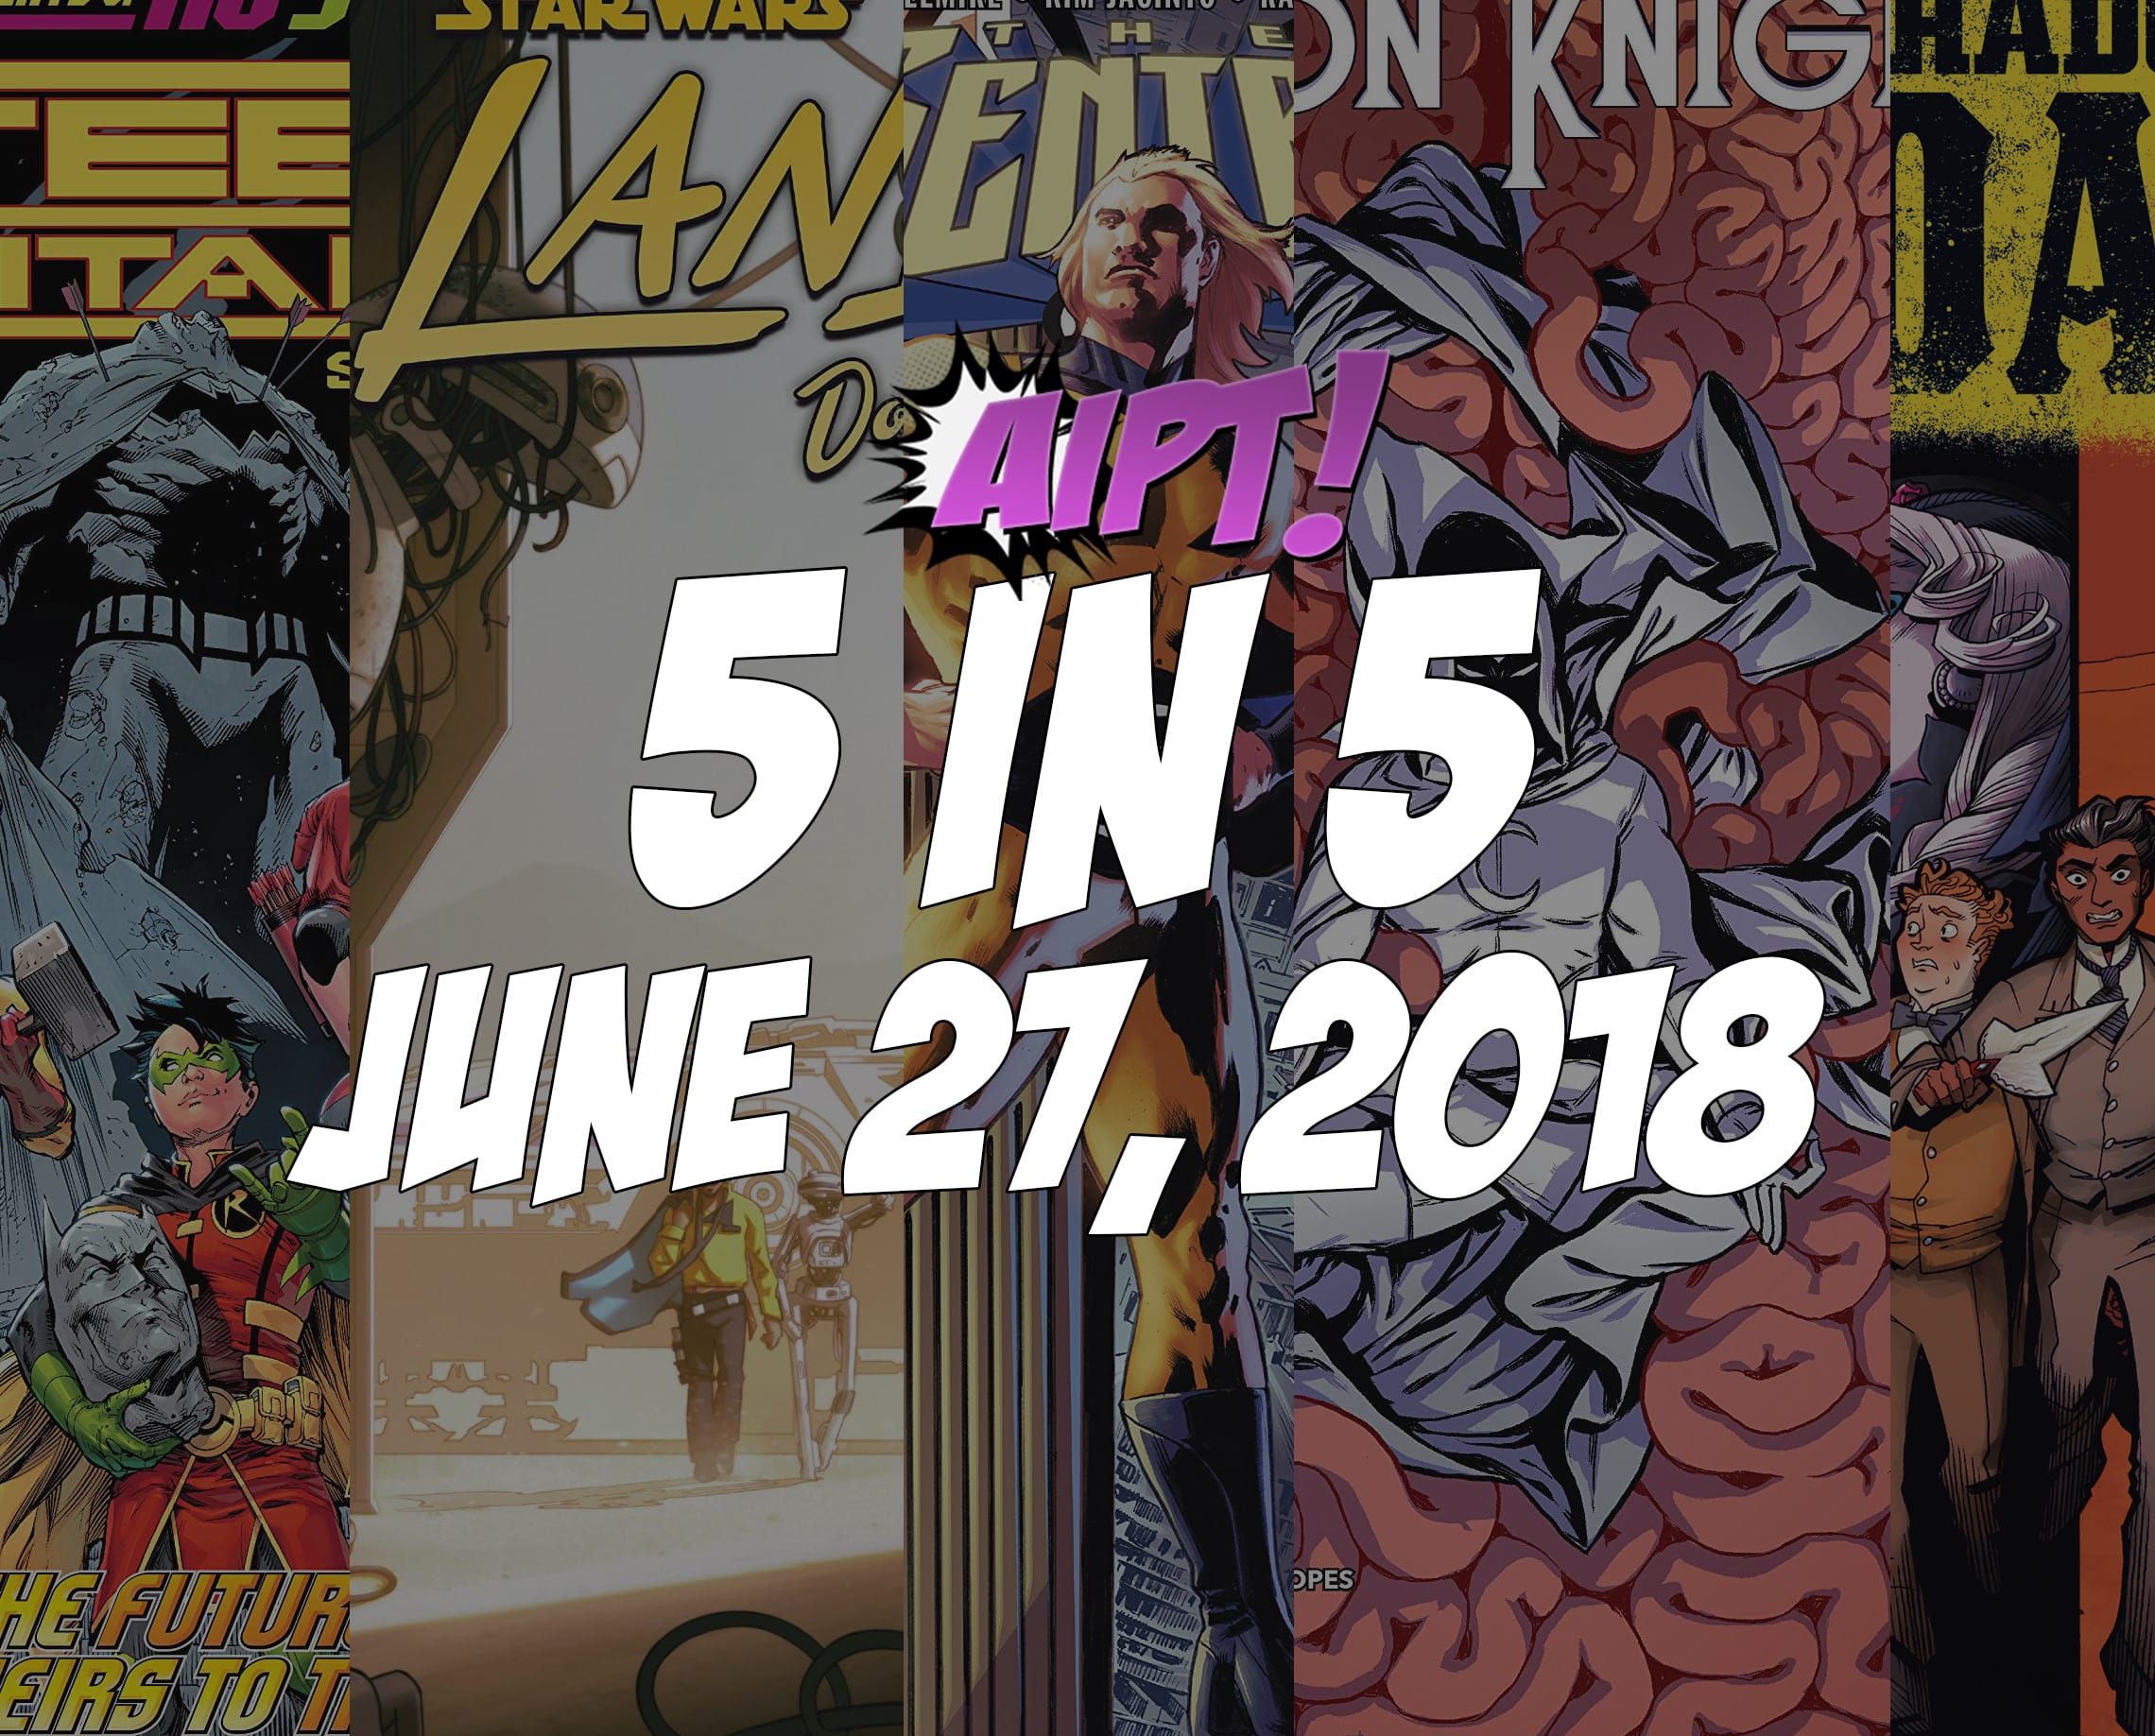 June 27, 2018's 5 in 5: The five comic books you should buy this week